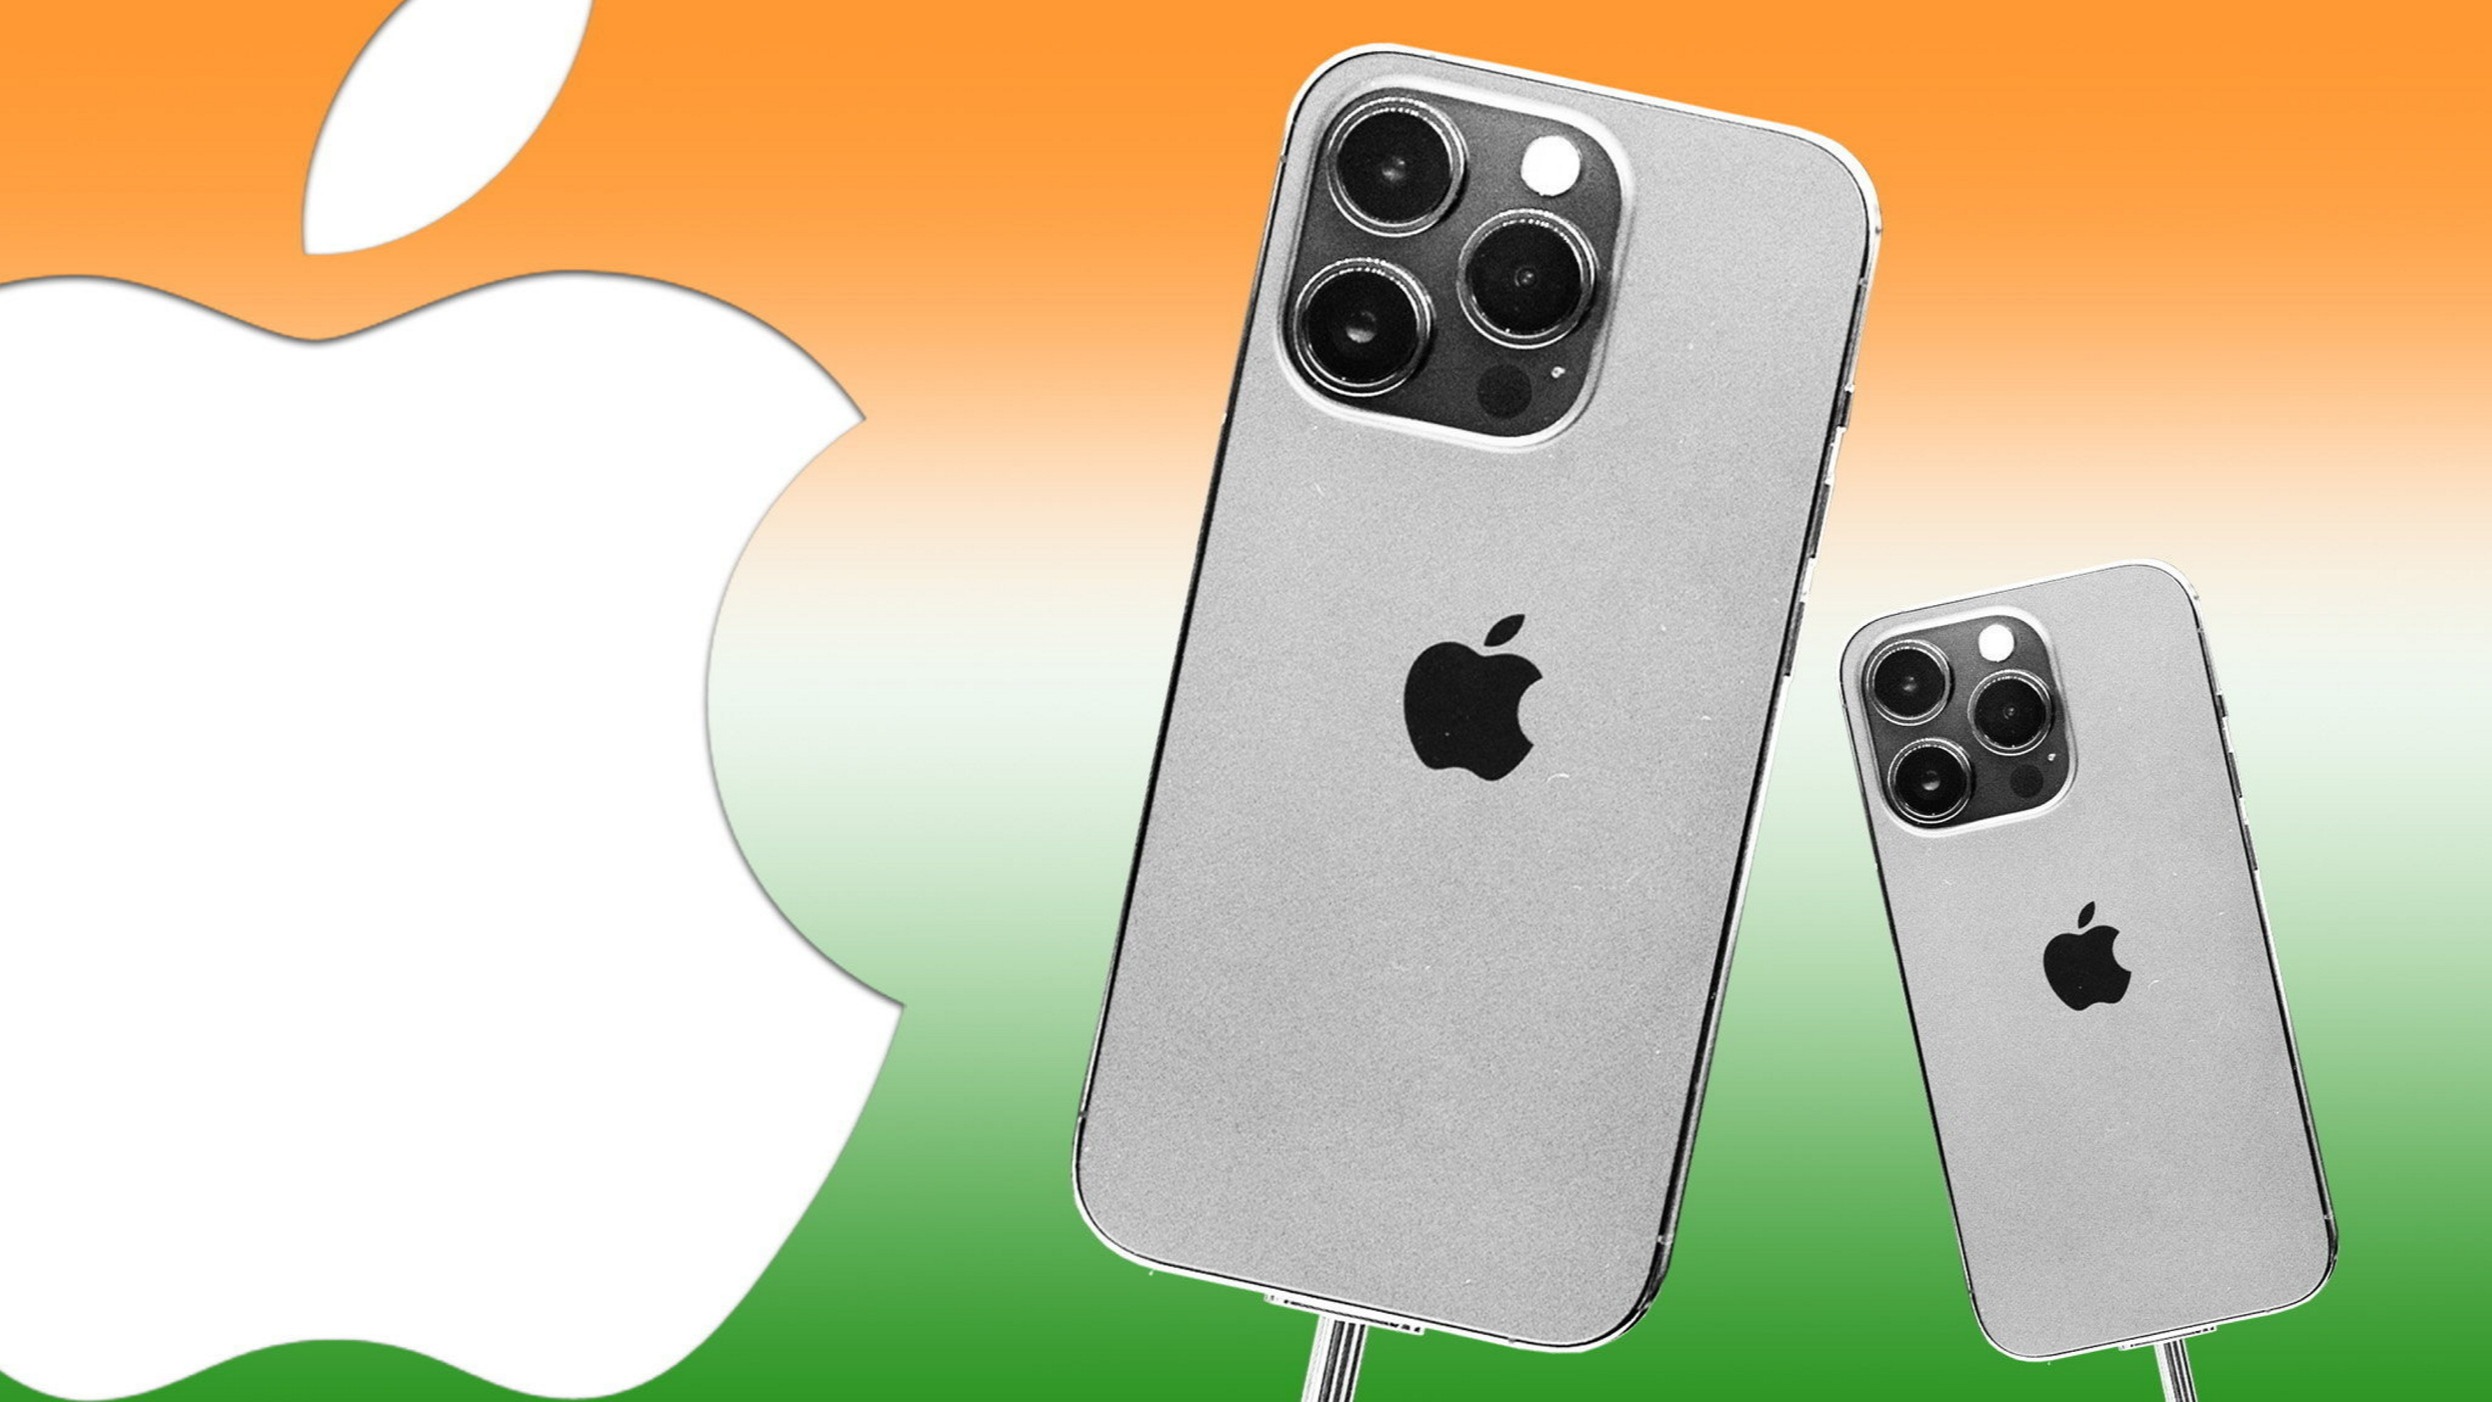 Apple's manufacturing shift to India hits stumbling blocks | Financial Times